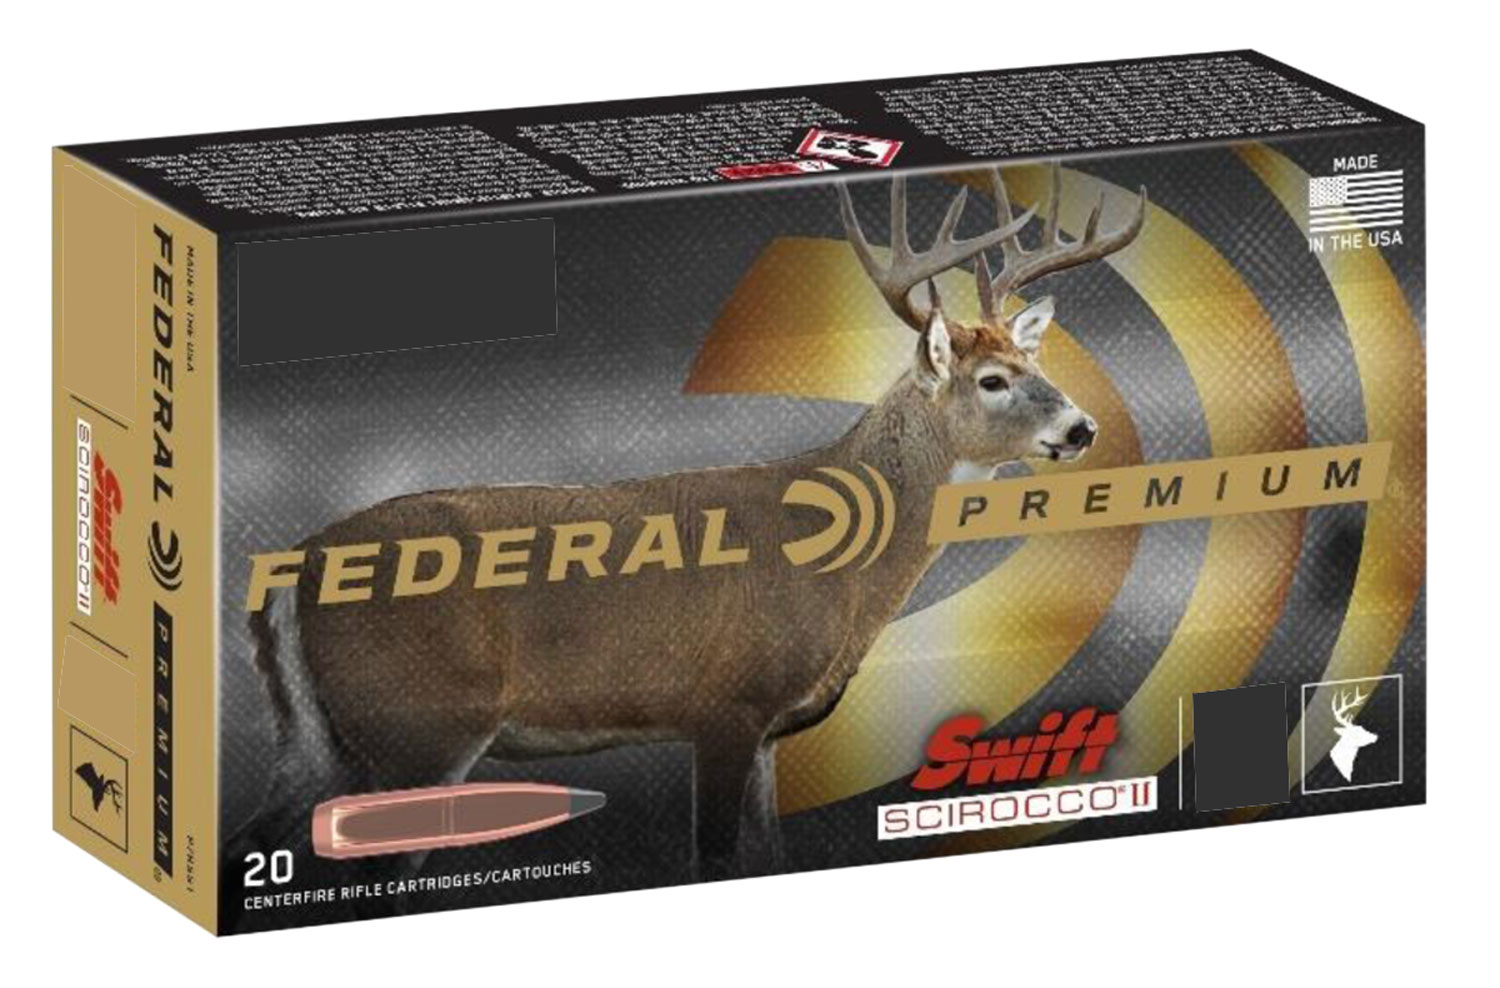 Federal Premium Rifle Ammunition P308SS1, 308 Win, Swift Scirocco II, 165 gr, 2700 fps, 20 Rd/Bx